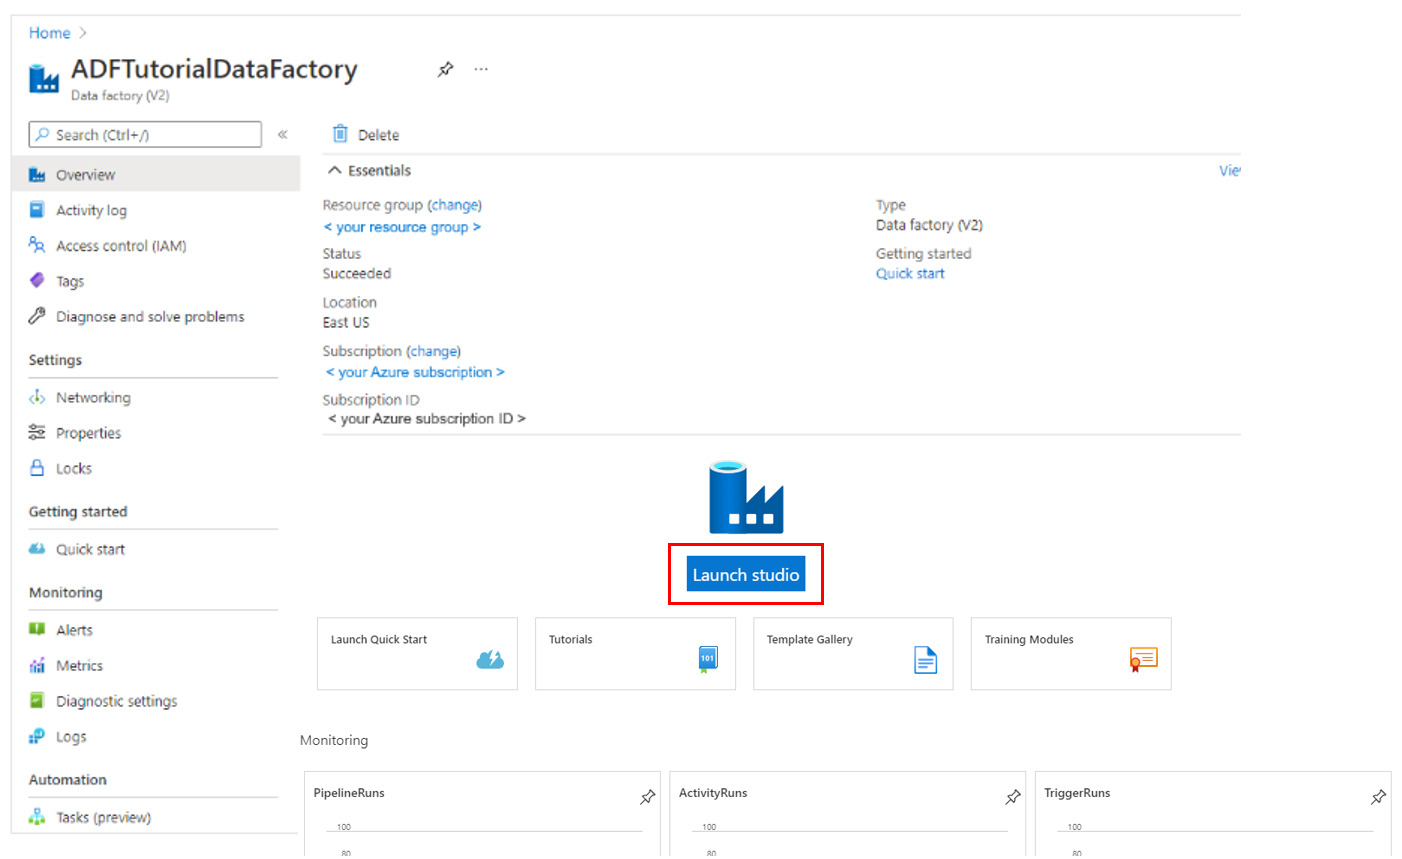 Home page for the Azure Data Factory, with the Open Azure Data Factory Studio tile highlighted.